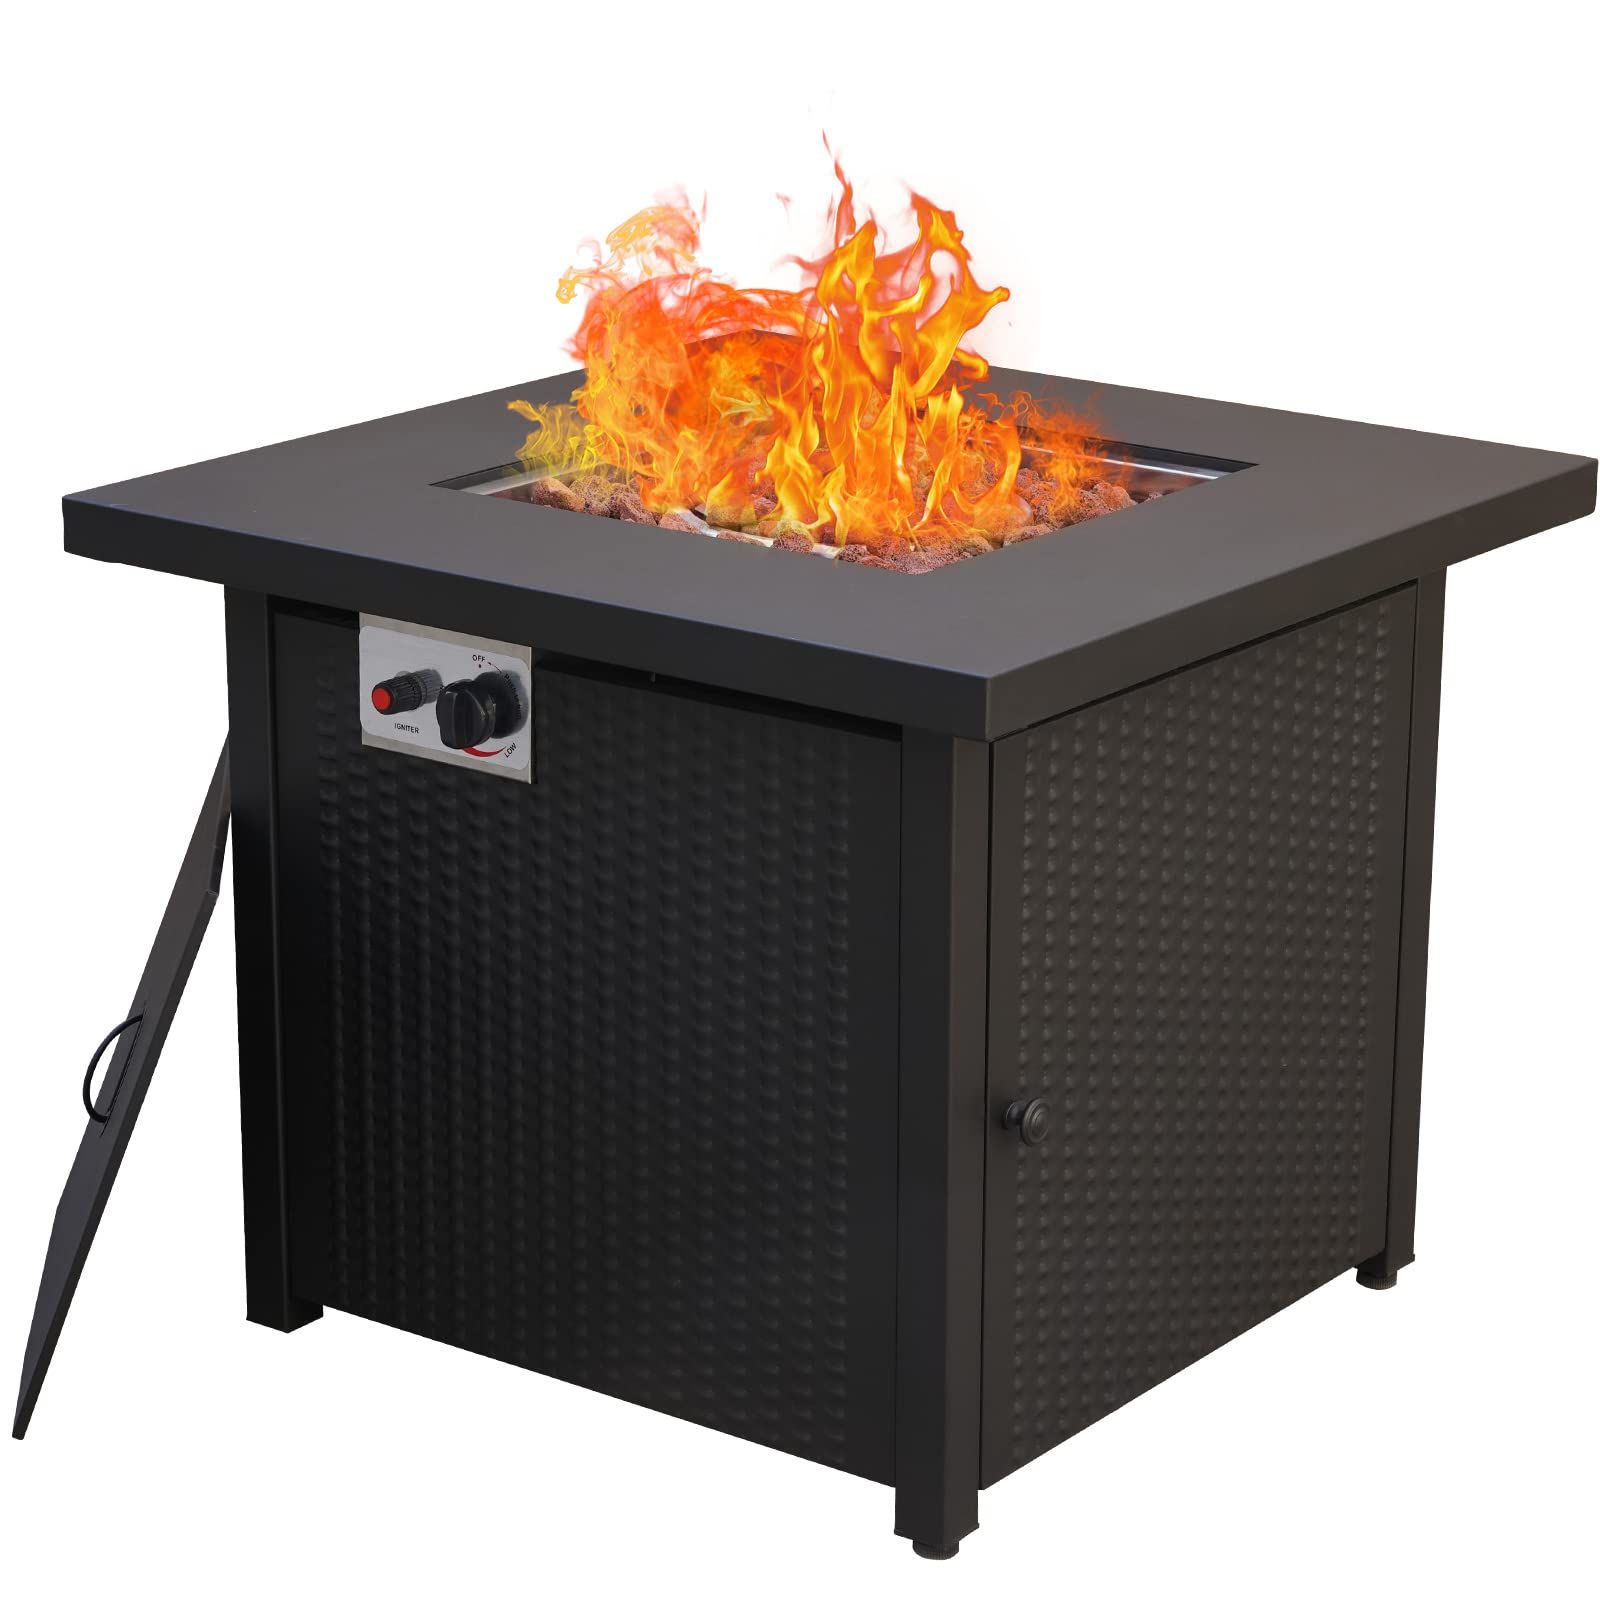 Grand Patio Outdoor Gas Fire Pit Table, 30 Inch Square Patio Propane Gas Fire Pit Table with Metal T | Amazon (US)